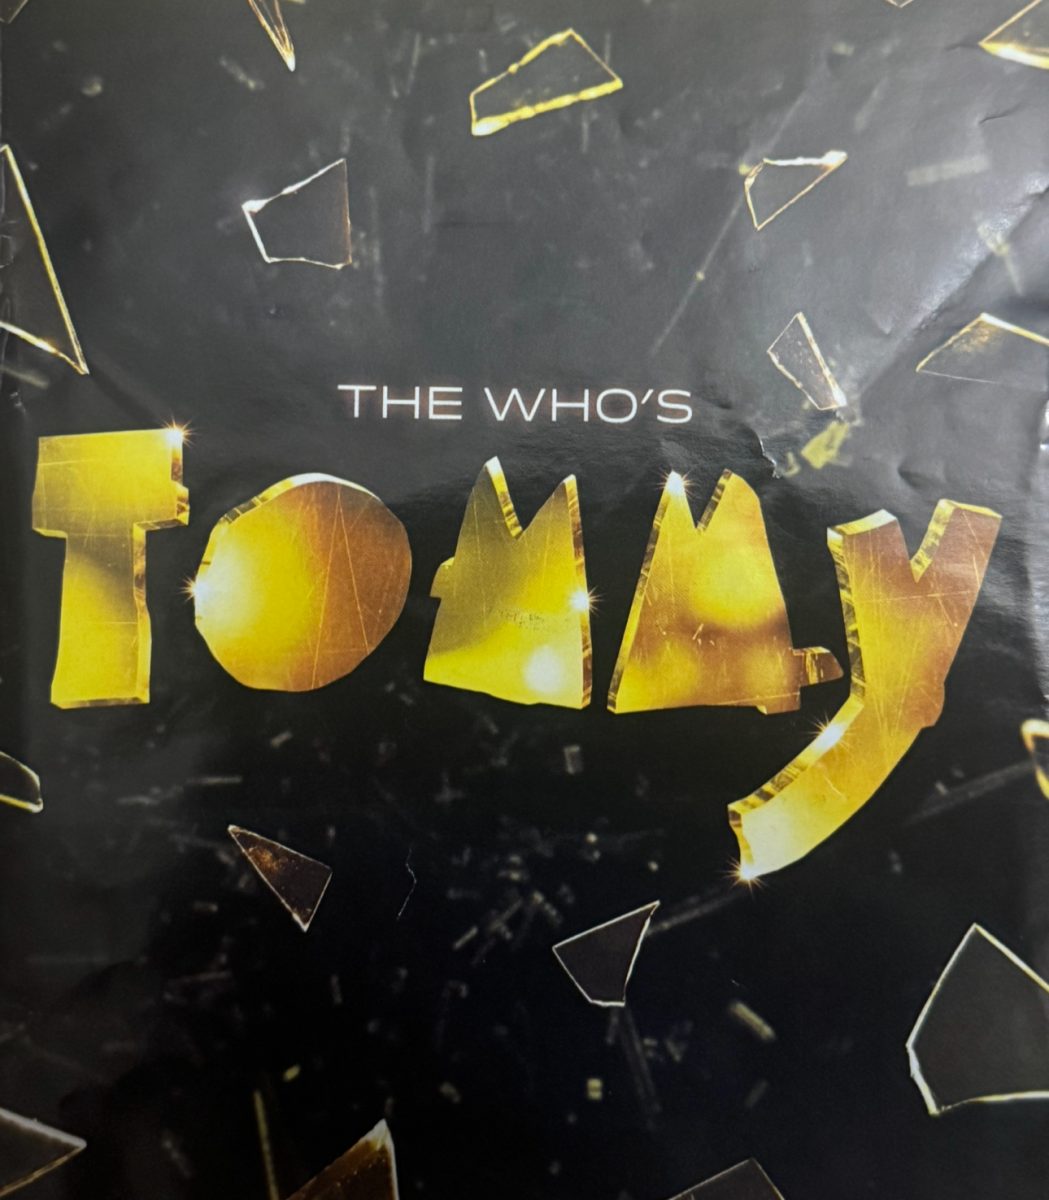 The+Whos+Tommy+Revival+is+Sensational